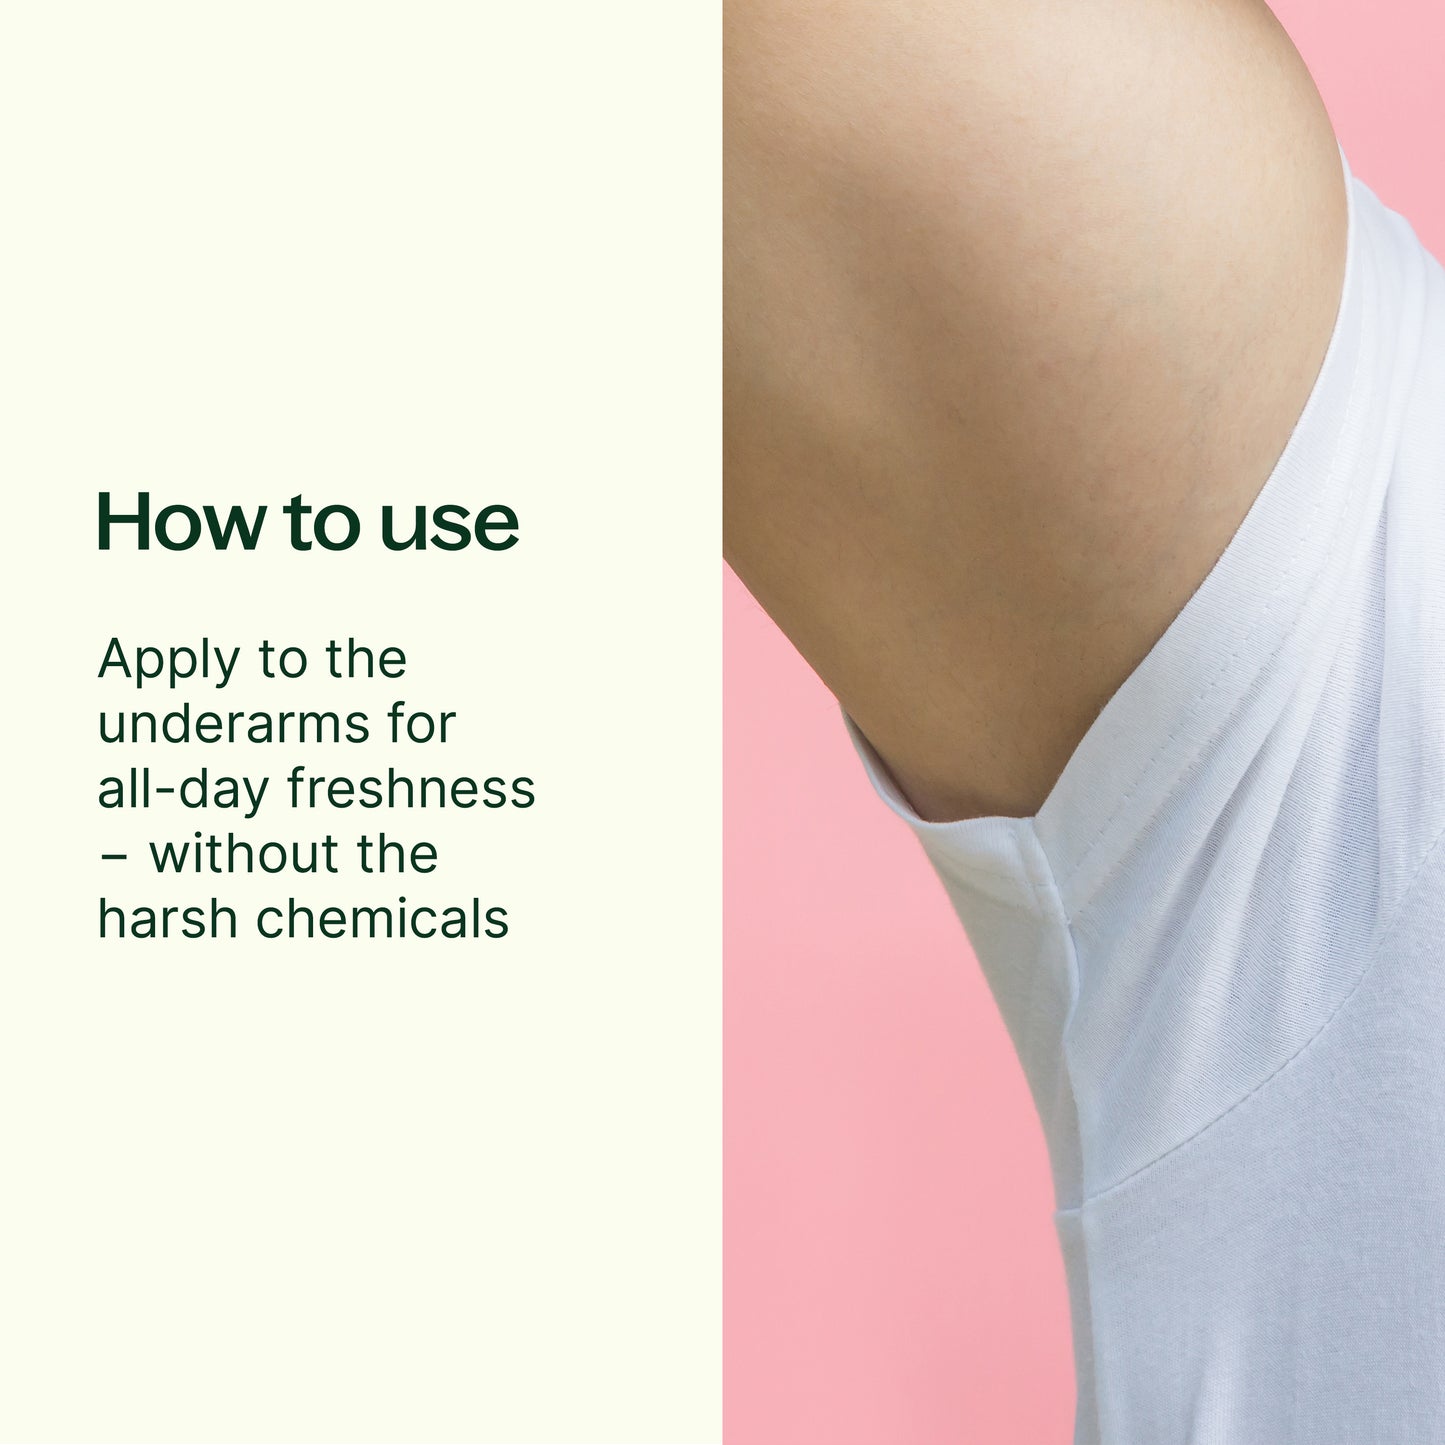 how to use: Apply to your underarms.